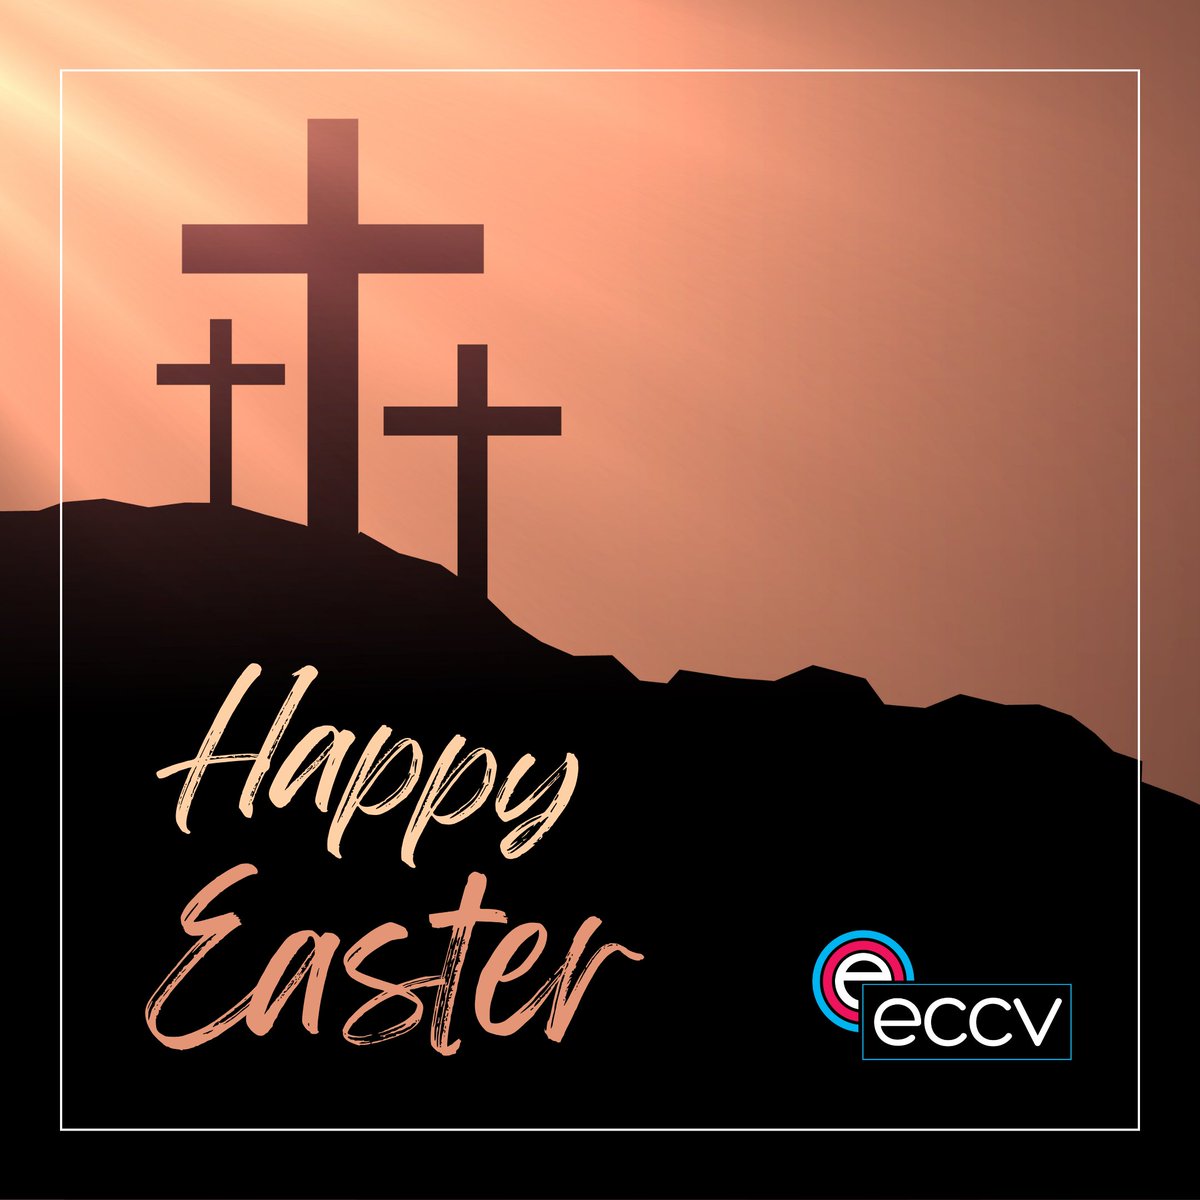 Happy Easter to our Christian friends across Victoria! May your Easter be filled with peace, joy and time with loved ones.